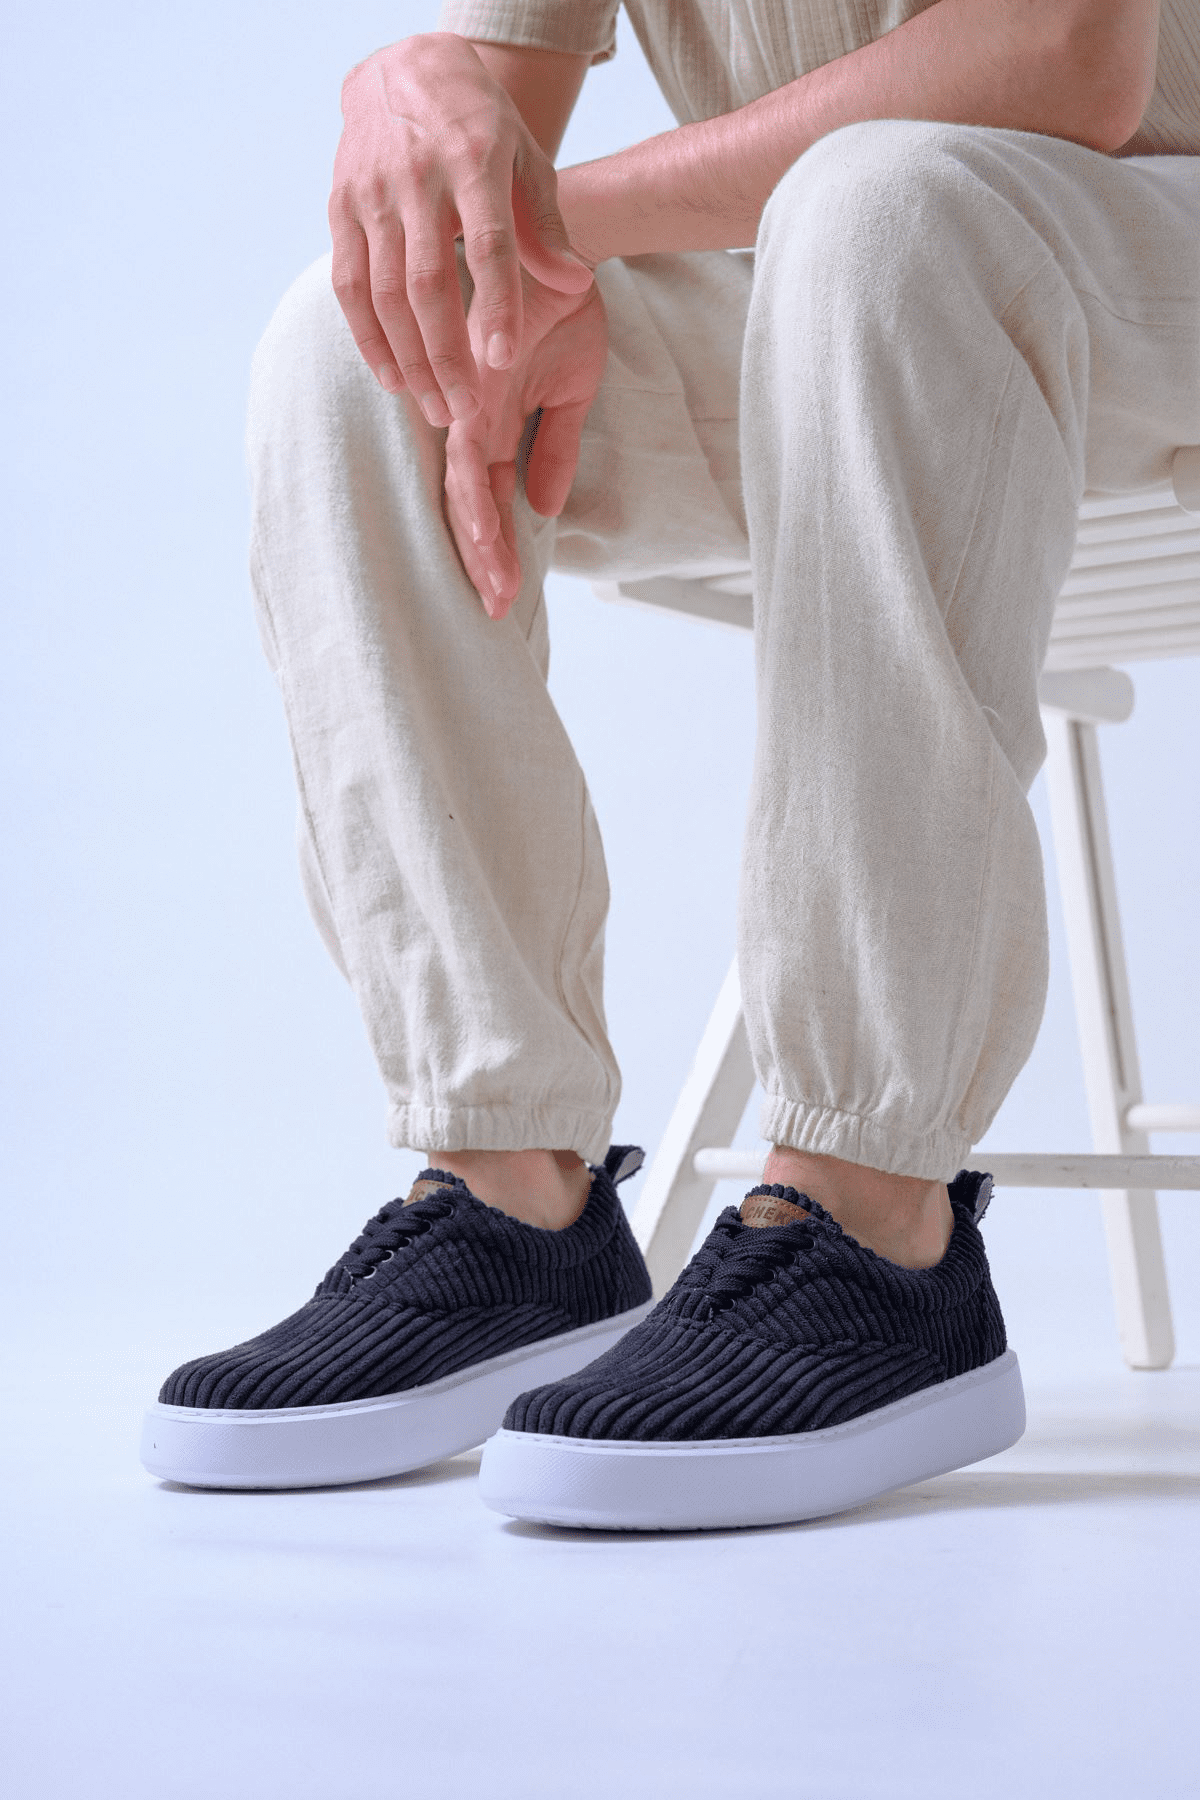 Chekich Men's Shoes Blue Color Lace-up Closure Knitting Fabric Material Quality High White Sole Flexible Casual Sports CH173